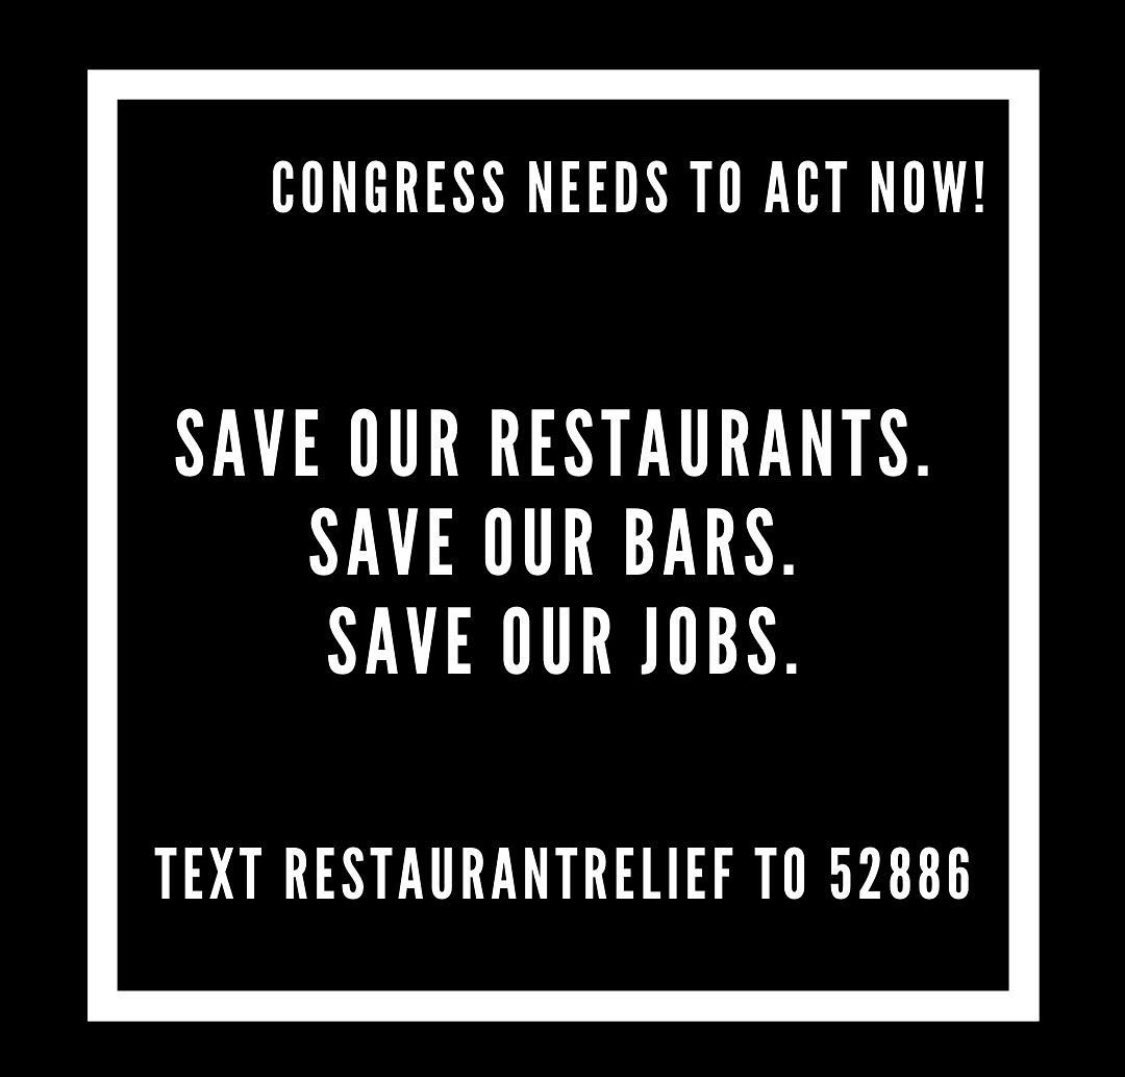 In September, for our Barrel Aged Beer contest, you helped us raise over 5k for industry workers relief. That is 5k more than any relief from Congress for the Hospitality Industry since March!!! We need your help again #saveourrestaurants #saveourbars #saveourjobs